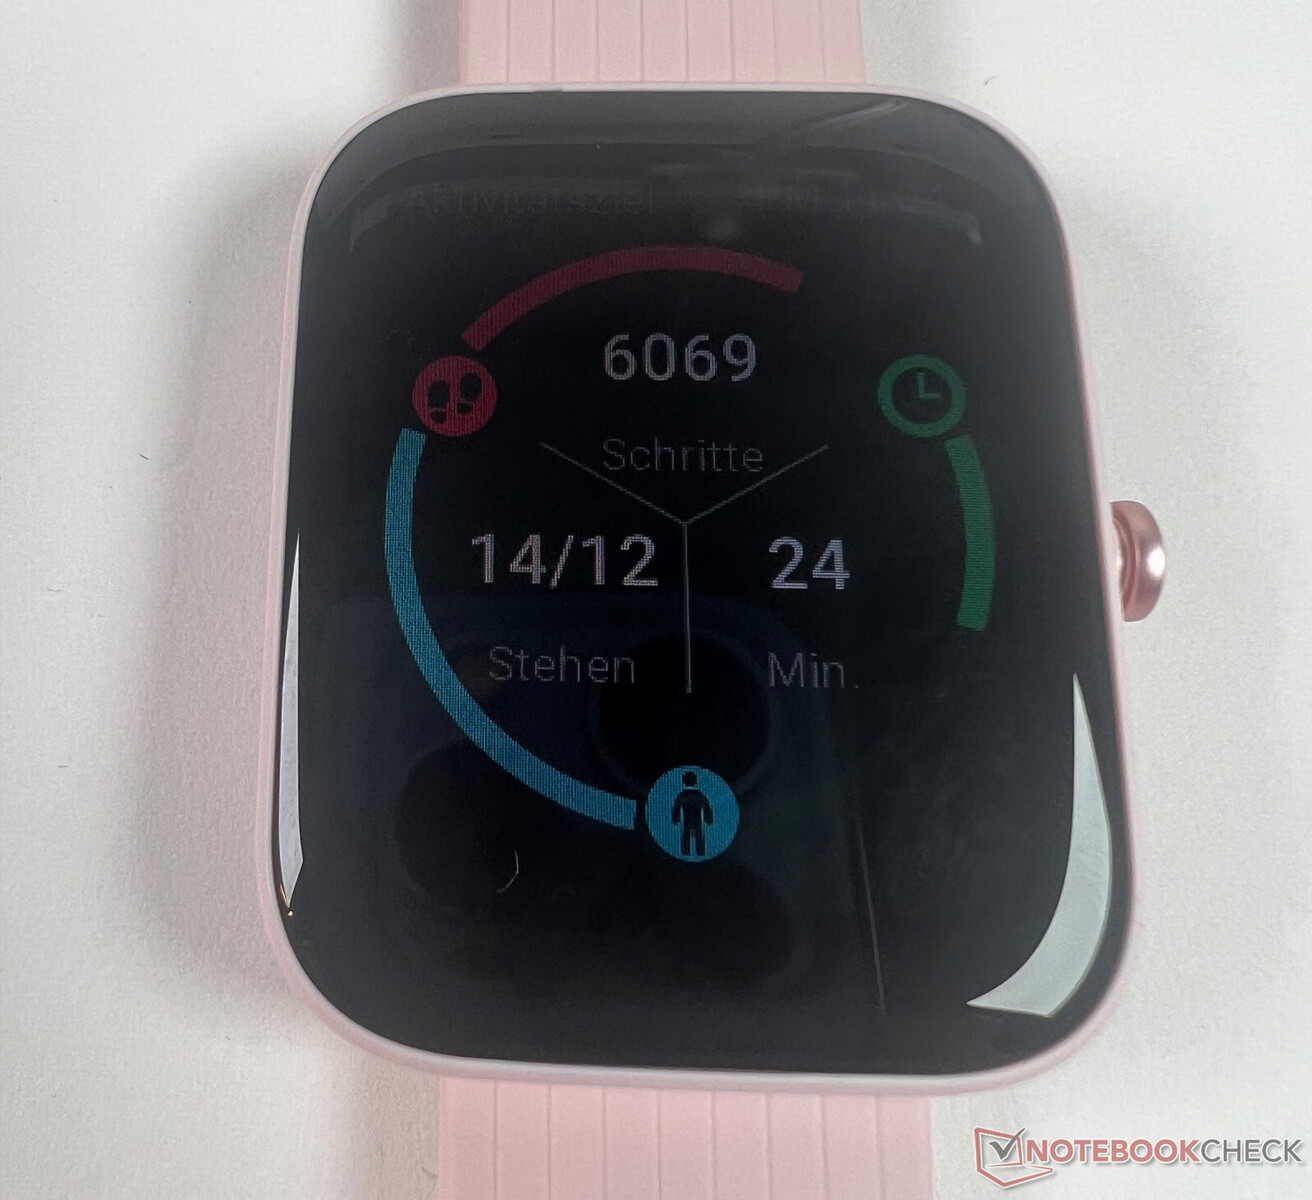 Amazfit brings the Bip 3 and Bip 3 Pro fitness trackers to Singapore 